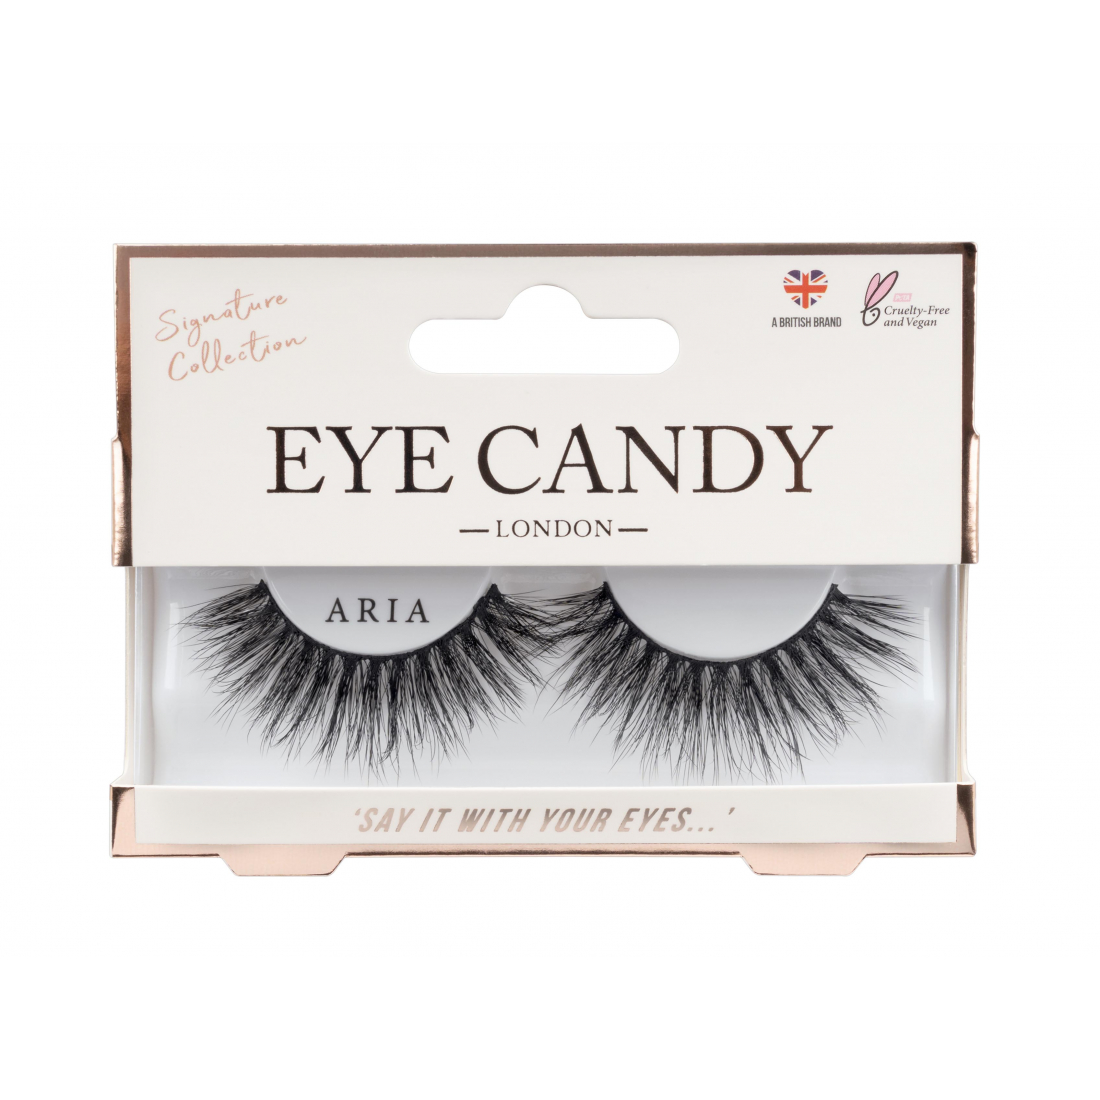 Faux cils 'Eye Candy Signature Collection' - Aria